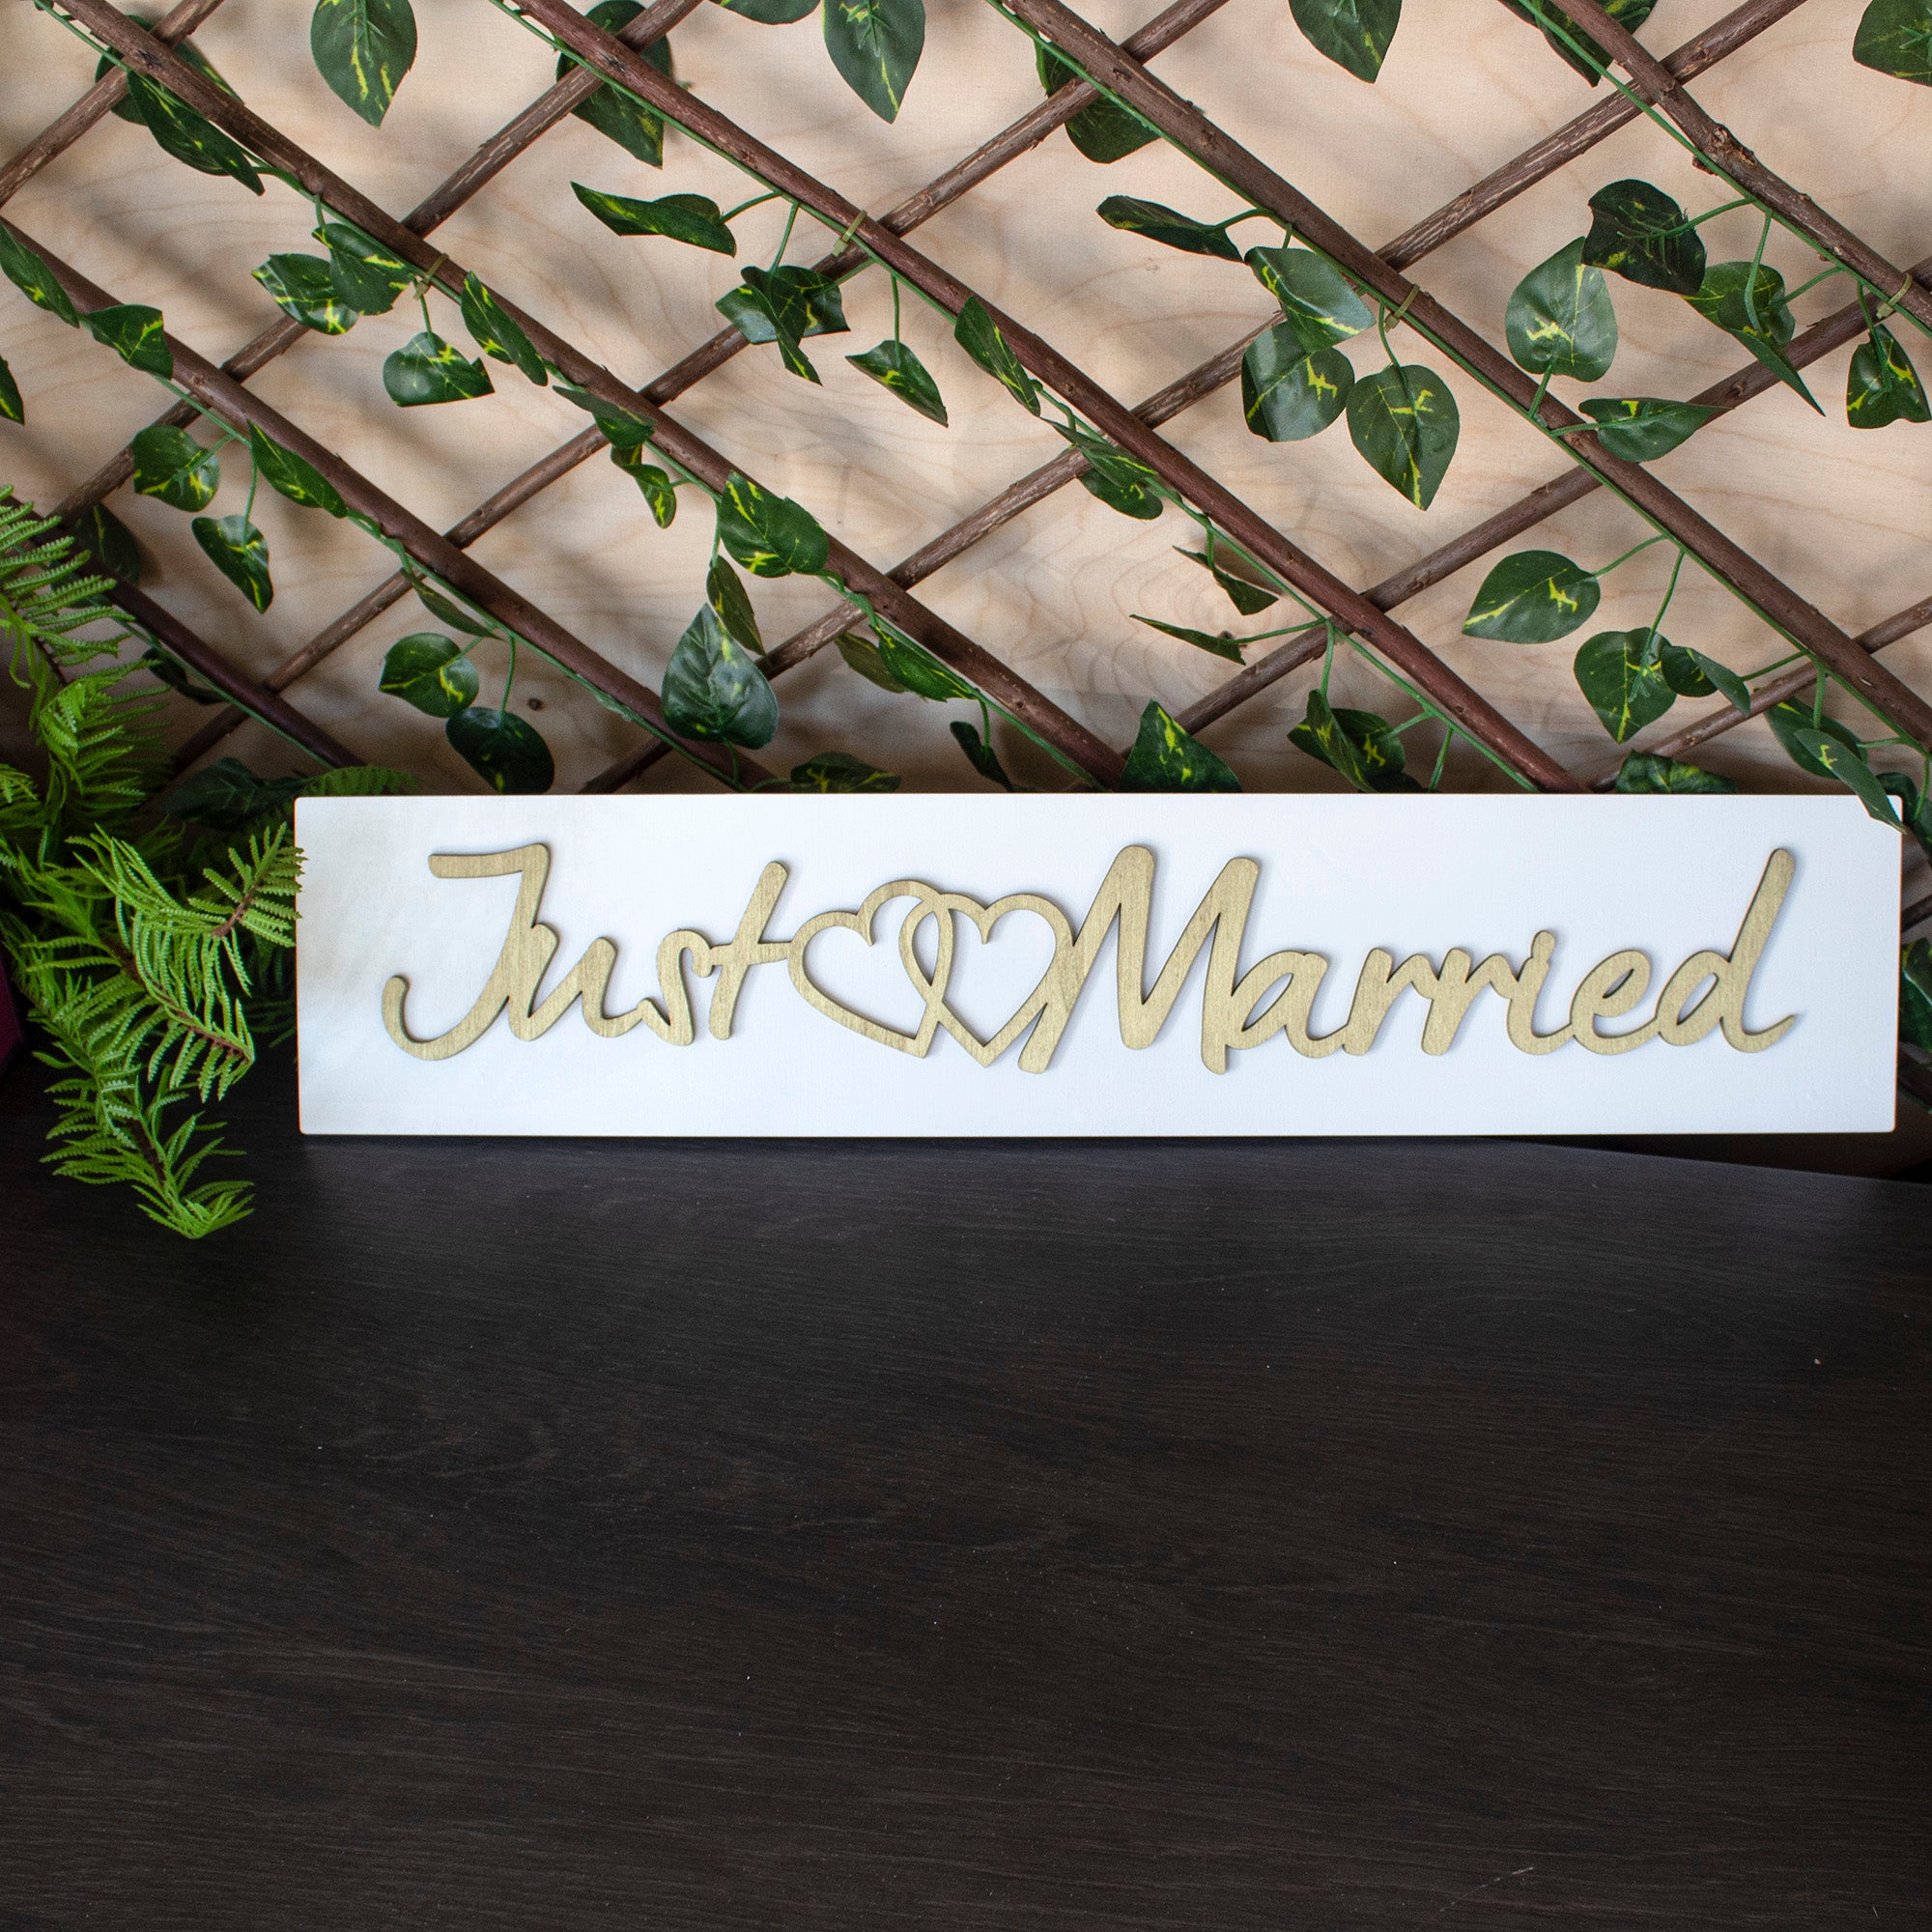 Custom wooden car plates for weddings - couple's names on one plate and "Just Married" on the other - high-quality and durable.